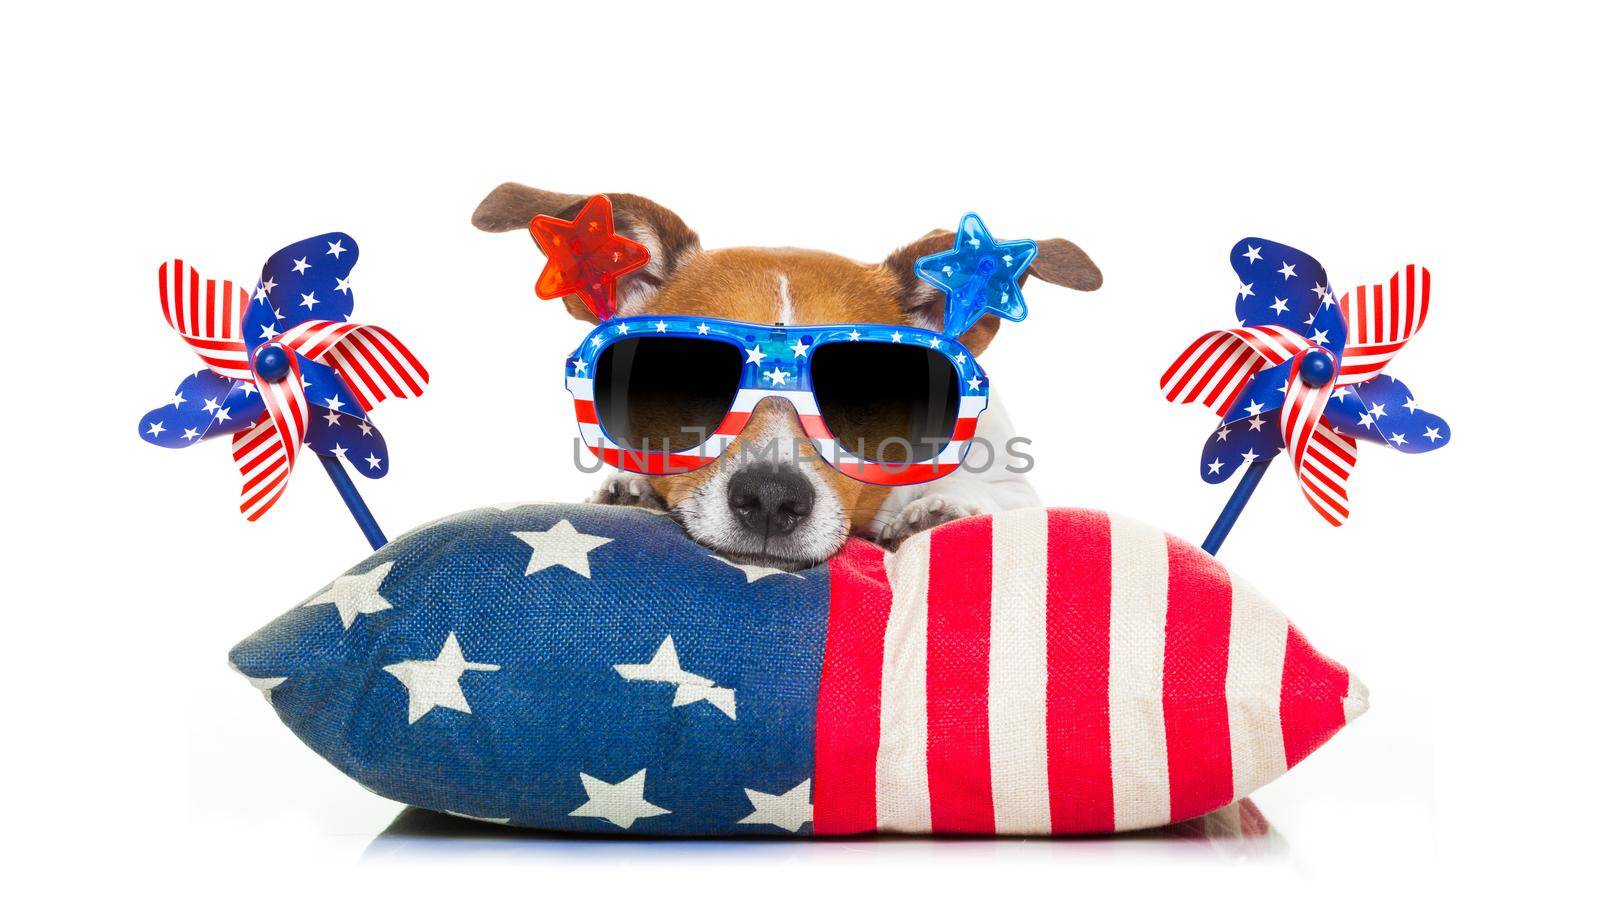 4th of july independence day dog by Brosch